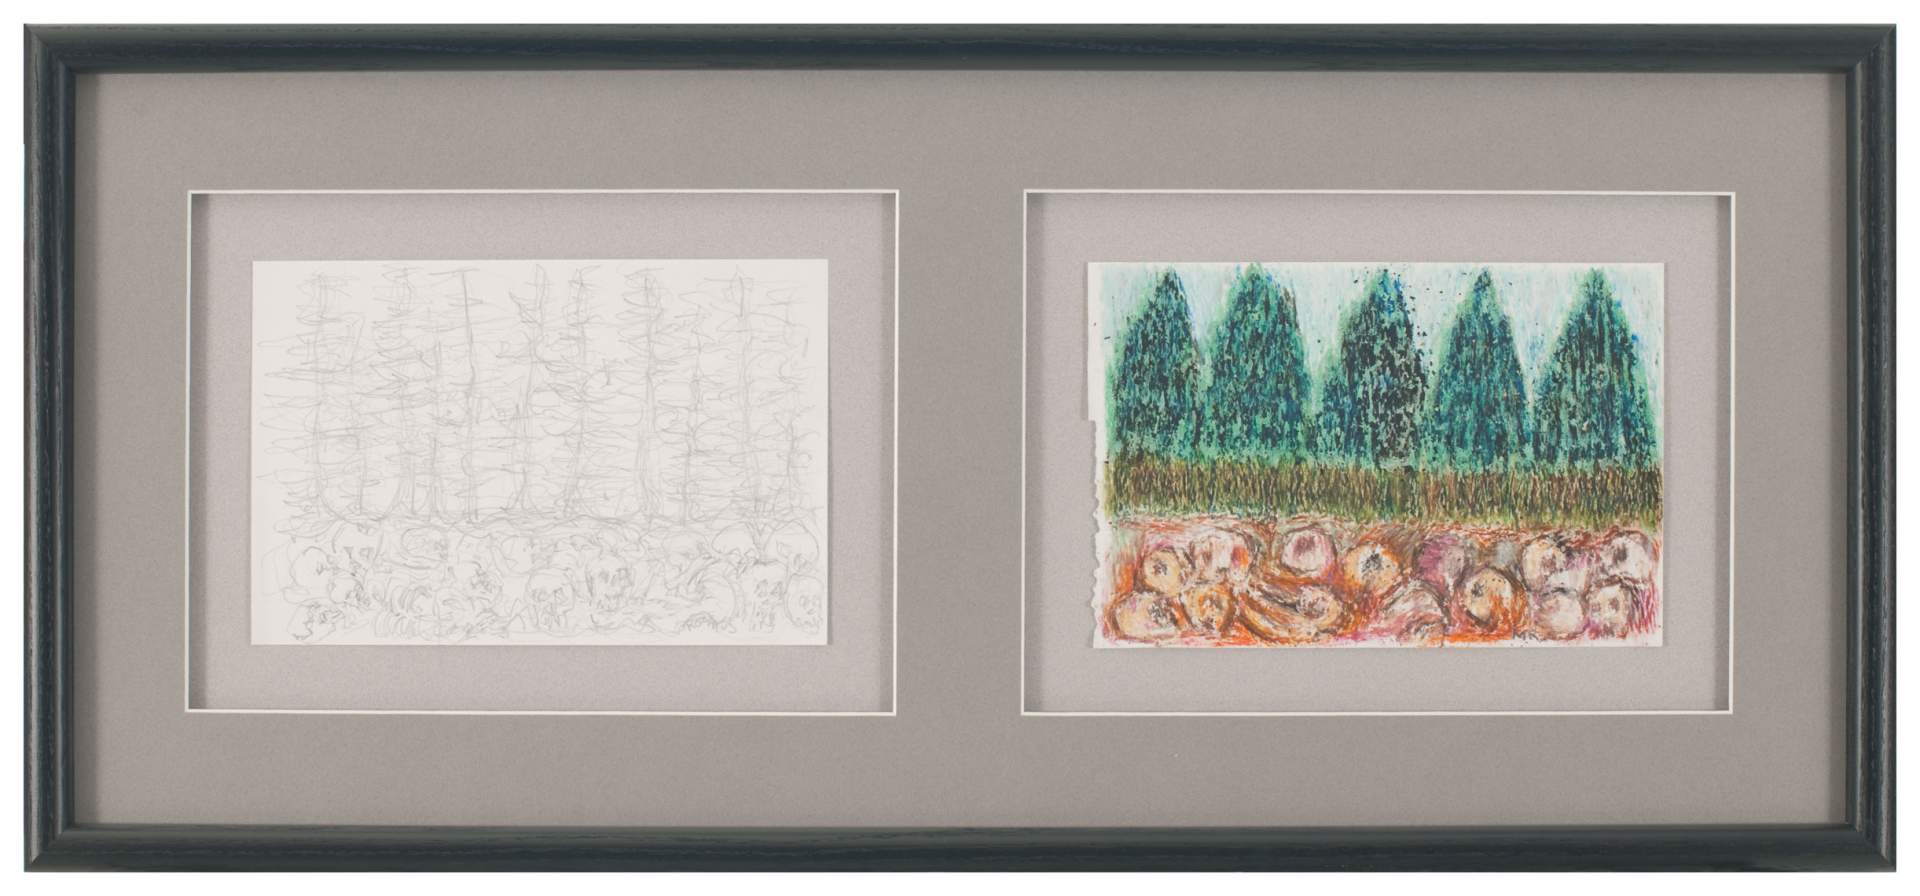 Study for Katyn Forest (right)